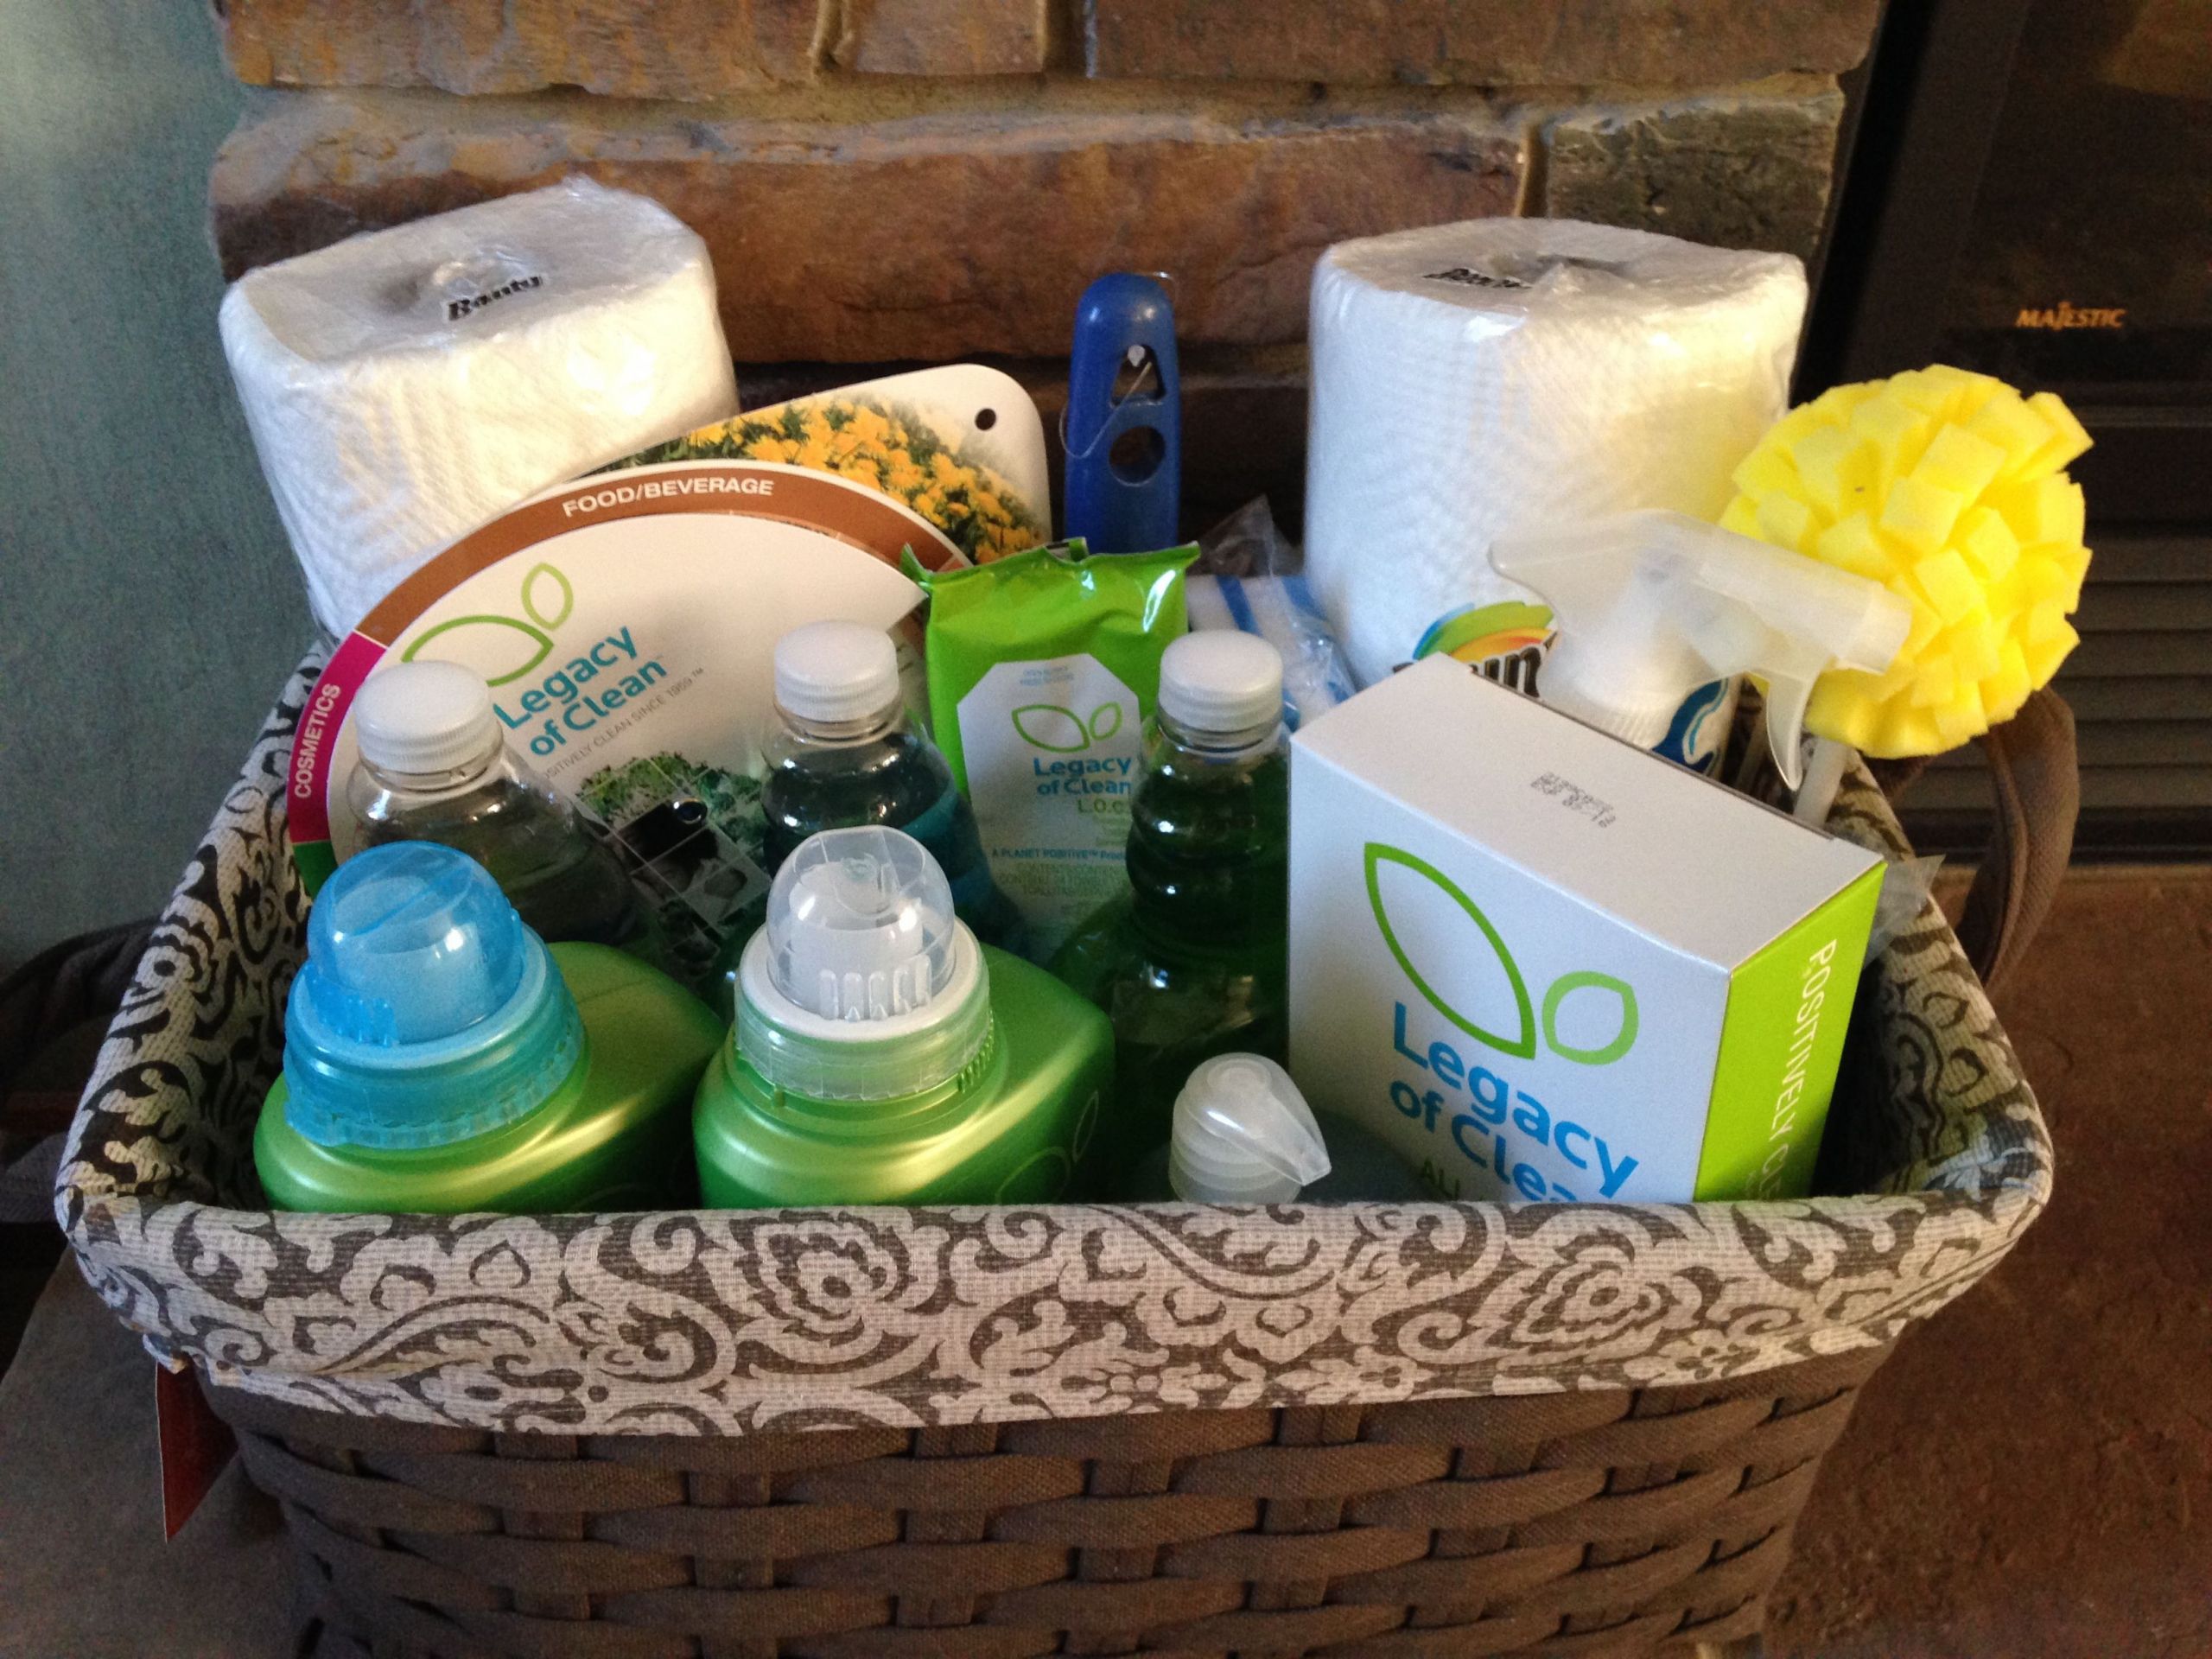 Welcome Home Gift Basket Ideas
 Housewarming Gift Basket All green cleaning products